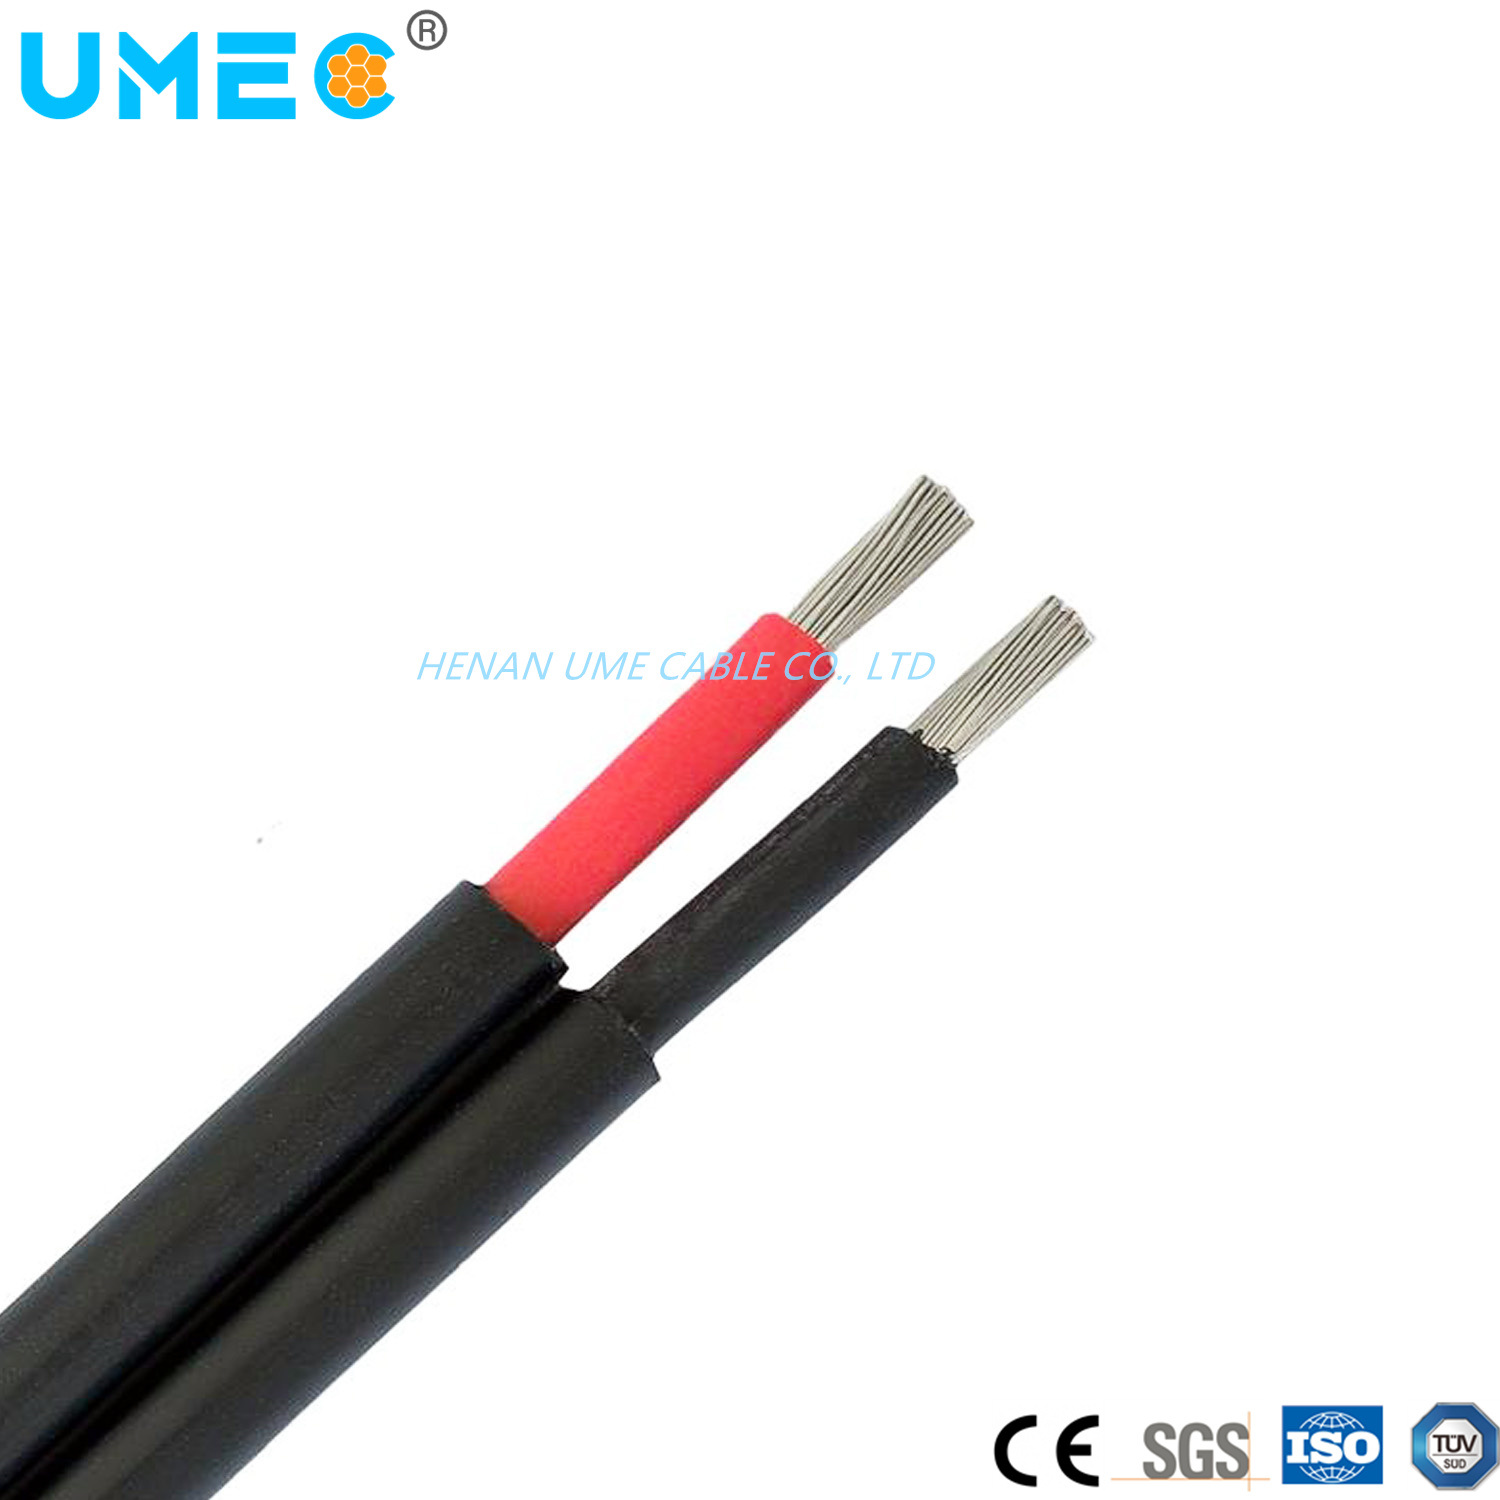 DC Cable Photovoltaic Solar (PV) Cable Wires Hffr Xlpo Insulated Sheath PV Wire